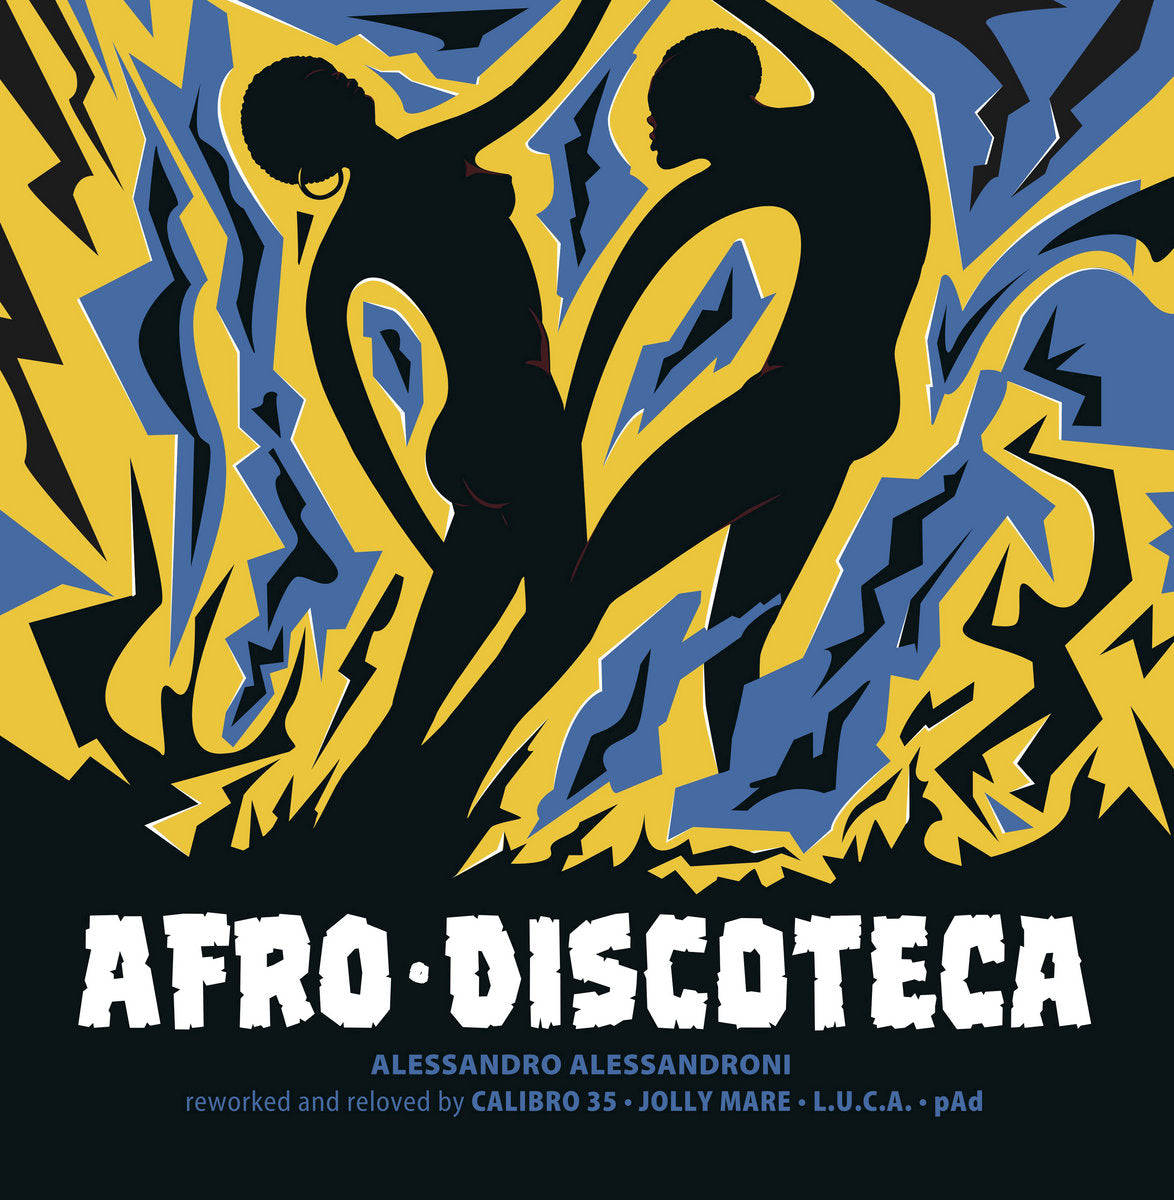 Alessandro Alessandroni - Afro Discoteca Reworked and Reloved